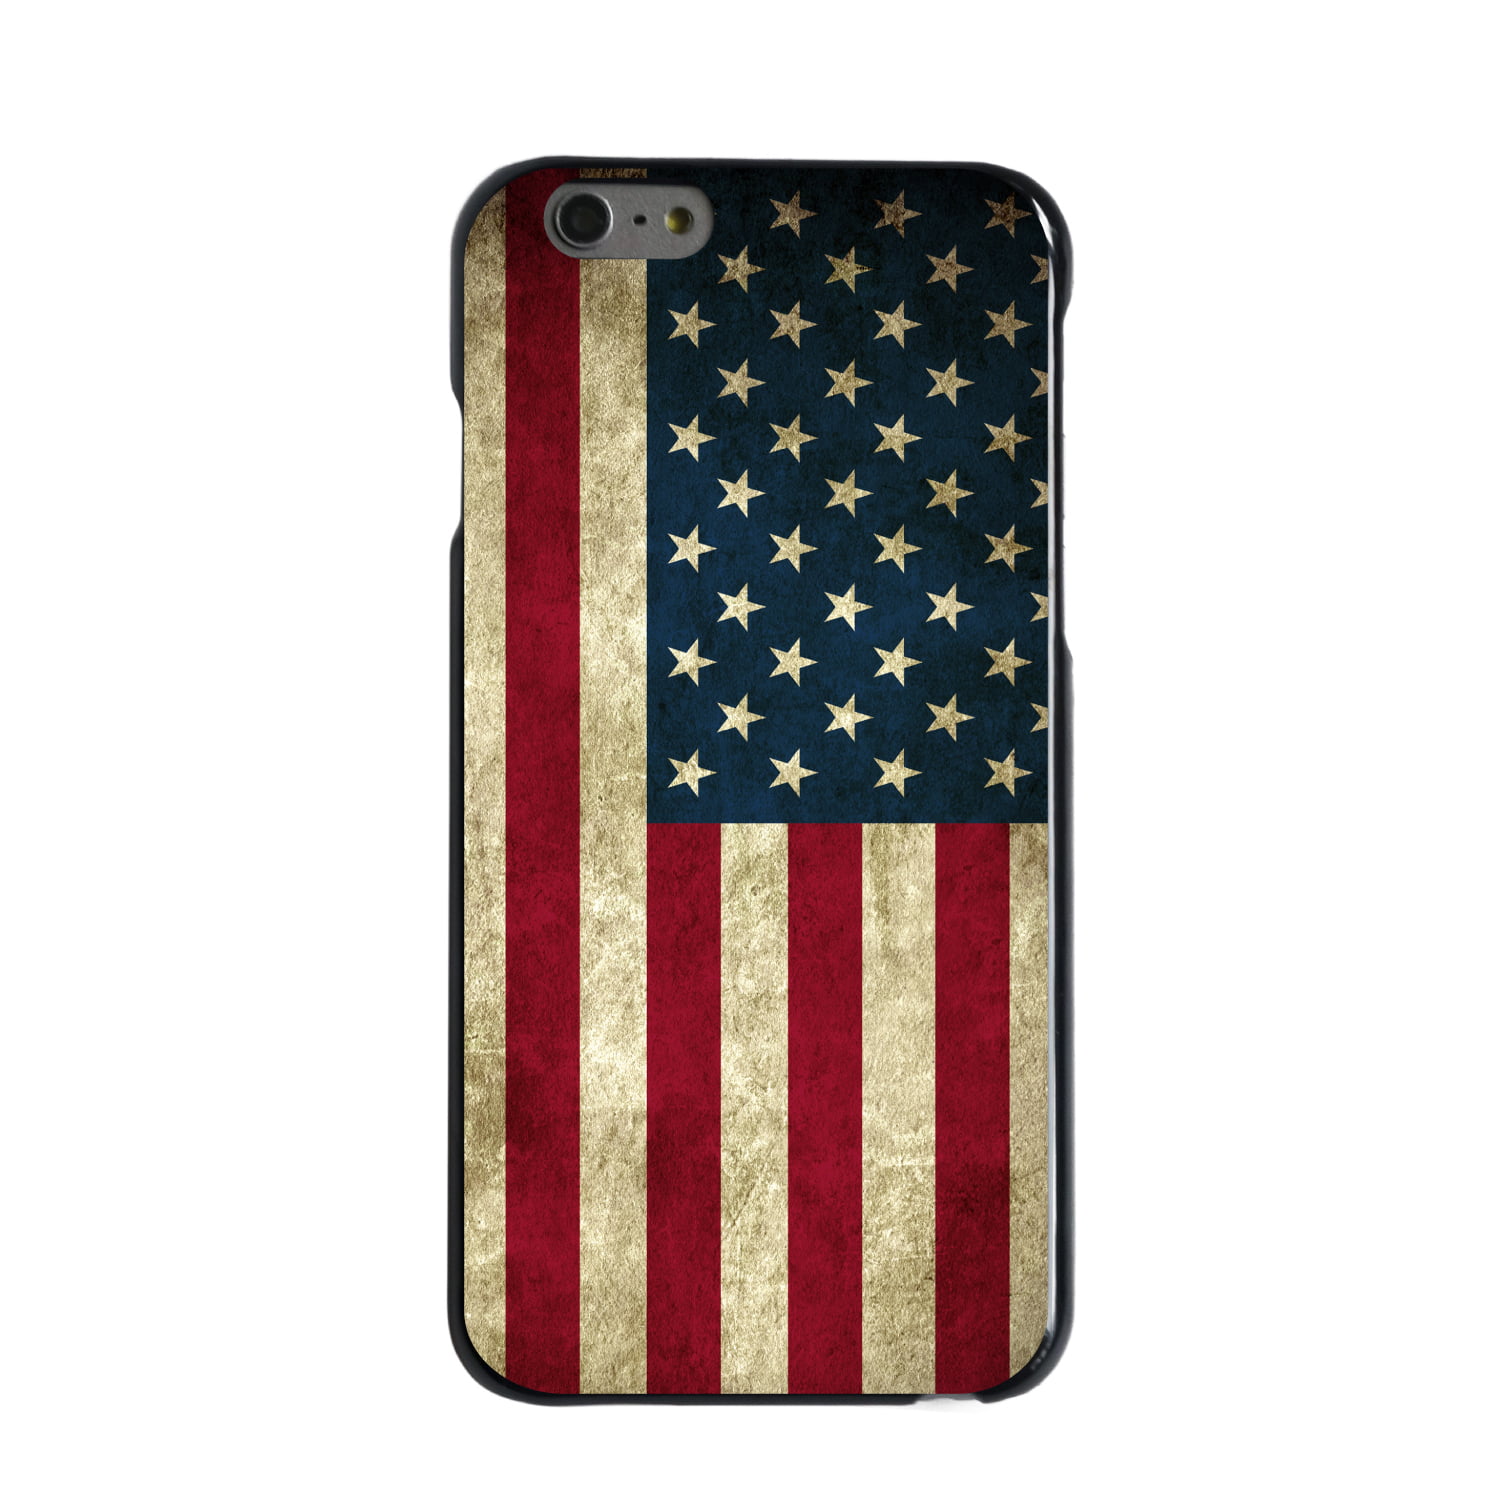 American USA Flag Design New Pattern Hard Back Case Cover For Apple iPod 4 5 6 